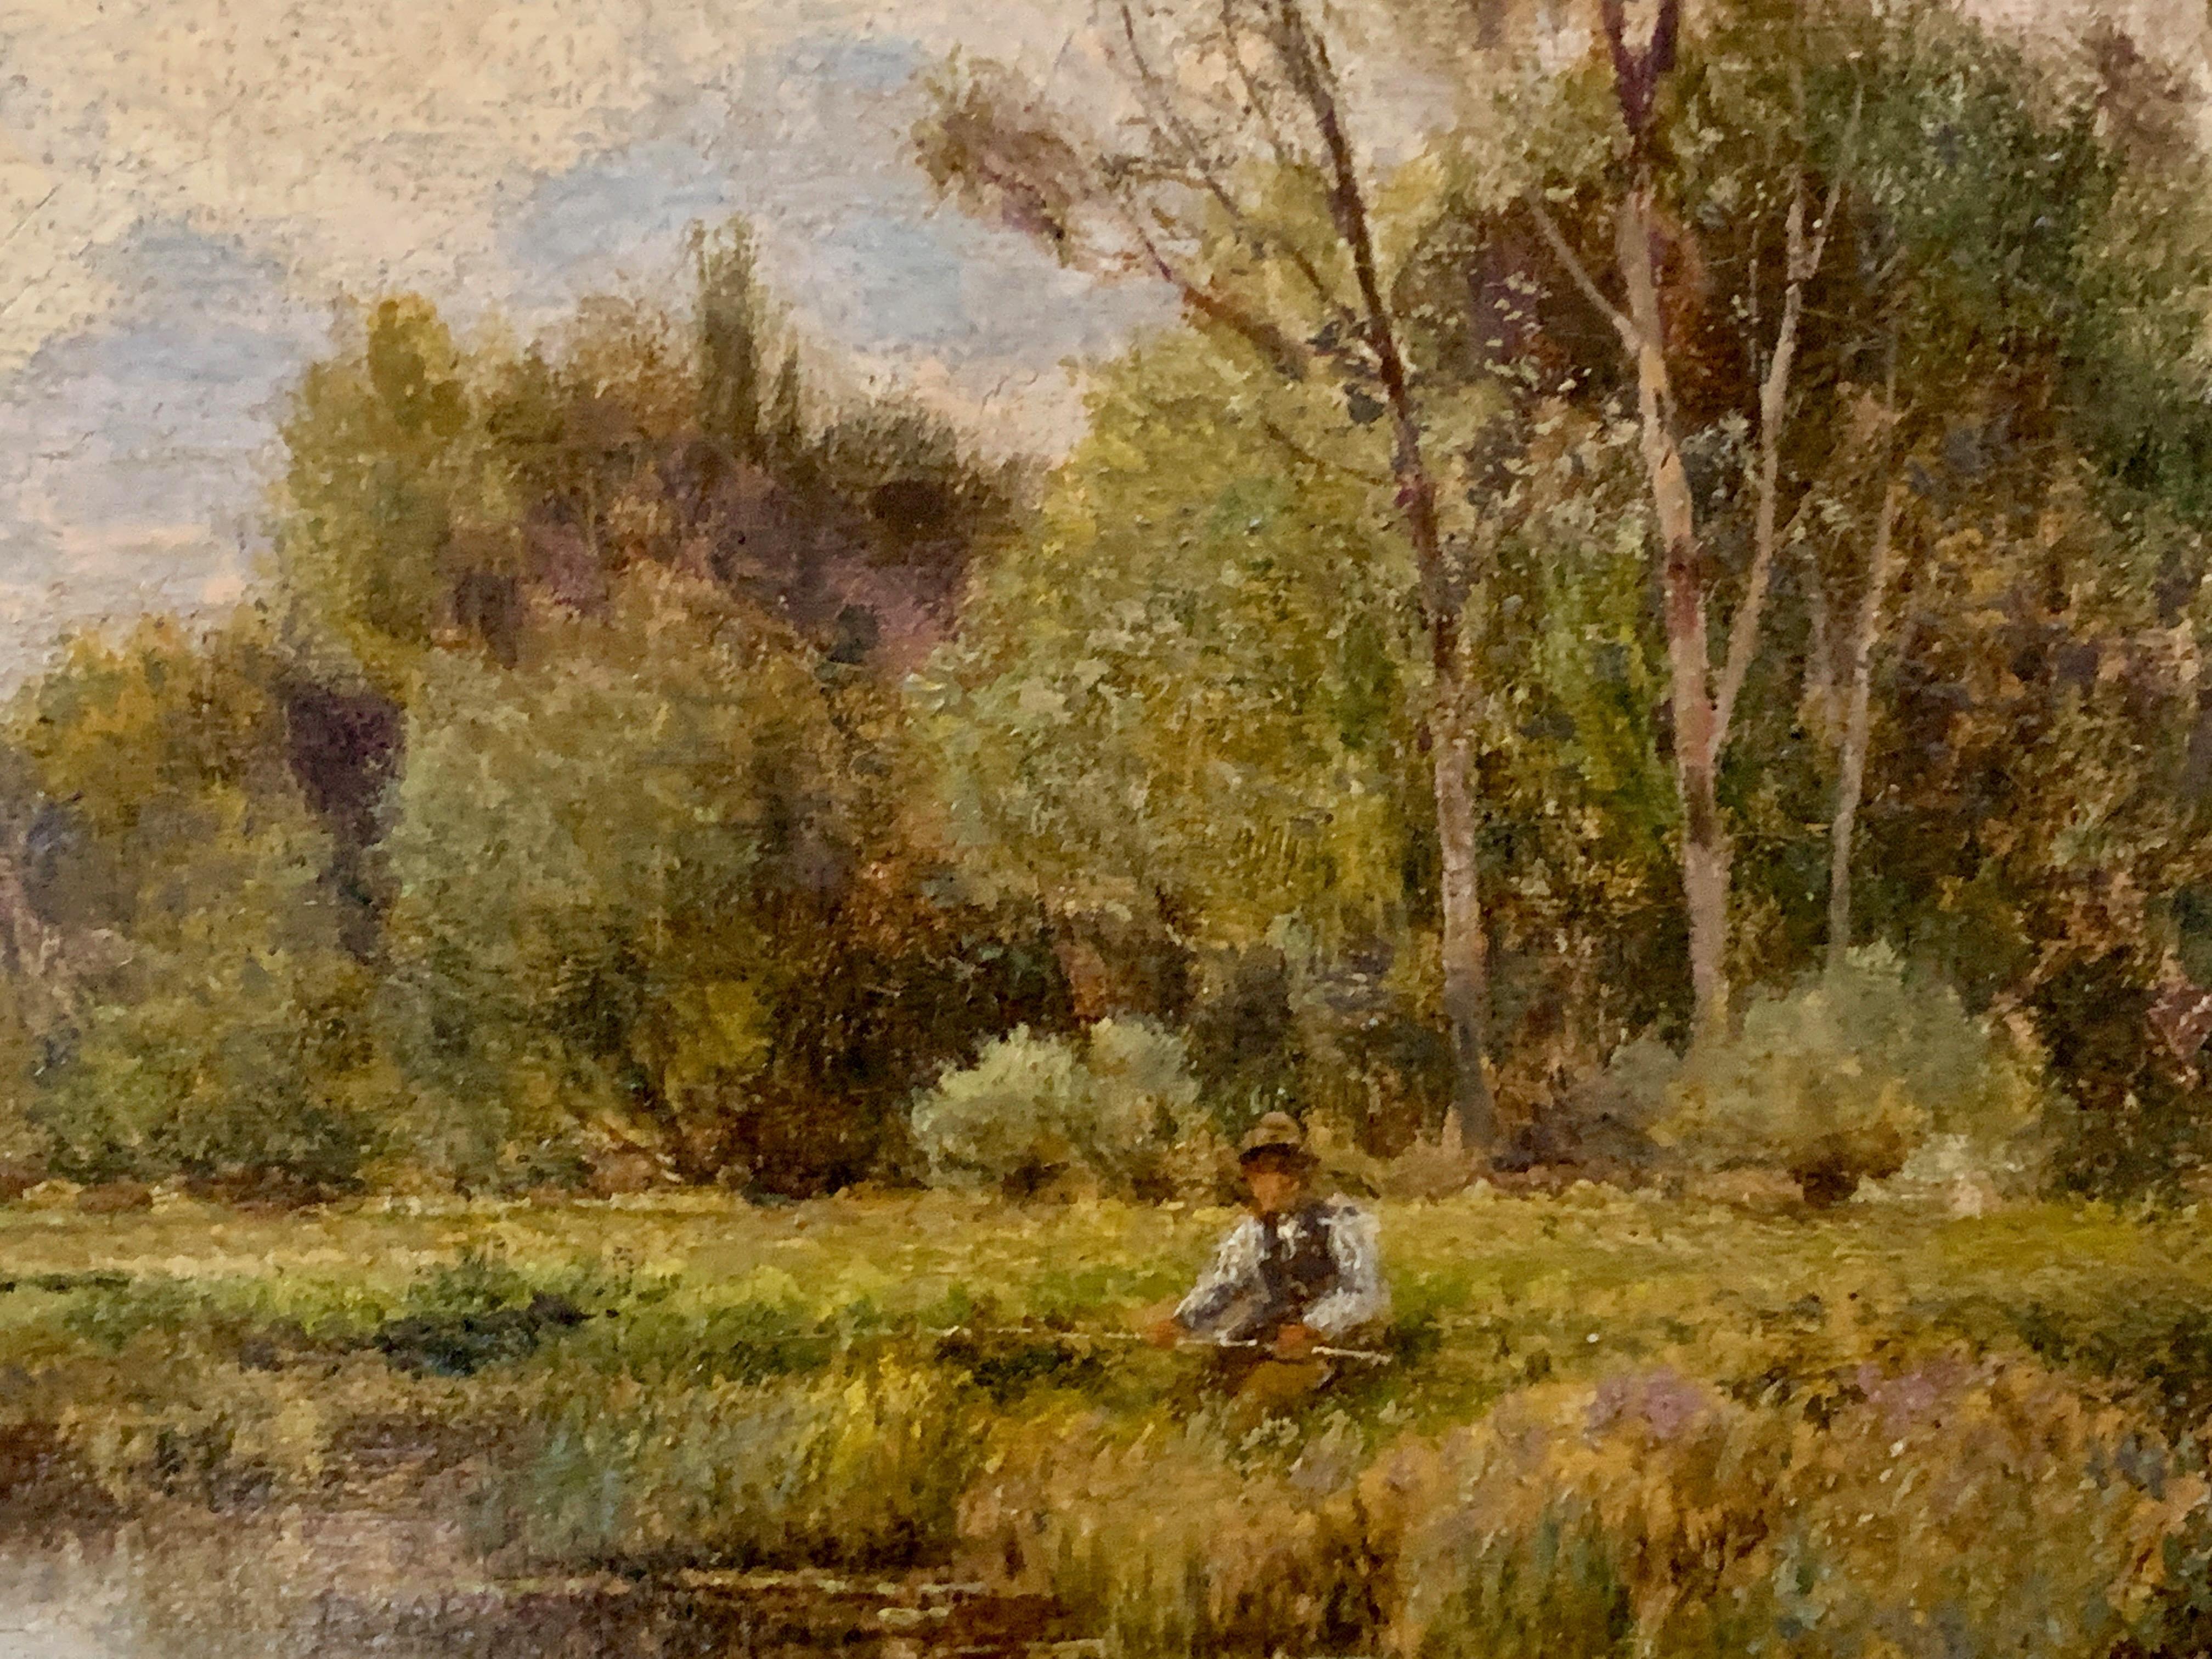 English Victorian River landscape on the Thame at Whitchurch, England - Brown Figurative Painting by Alfred Augustus Glendening Snr